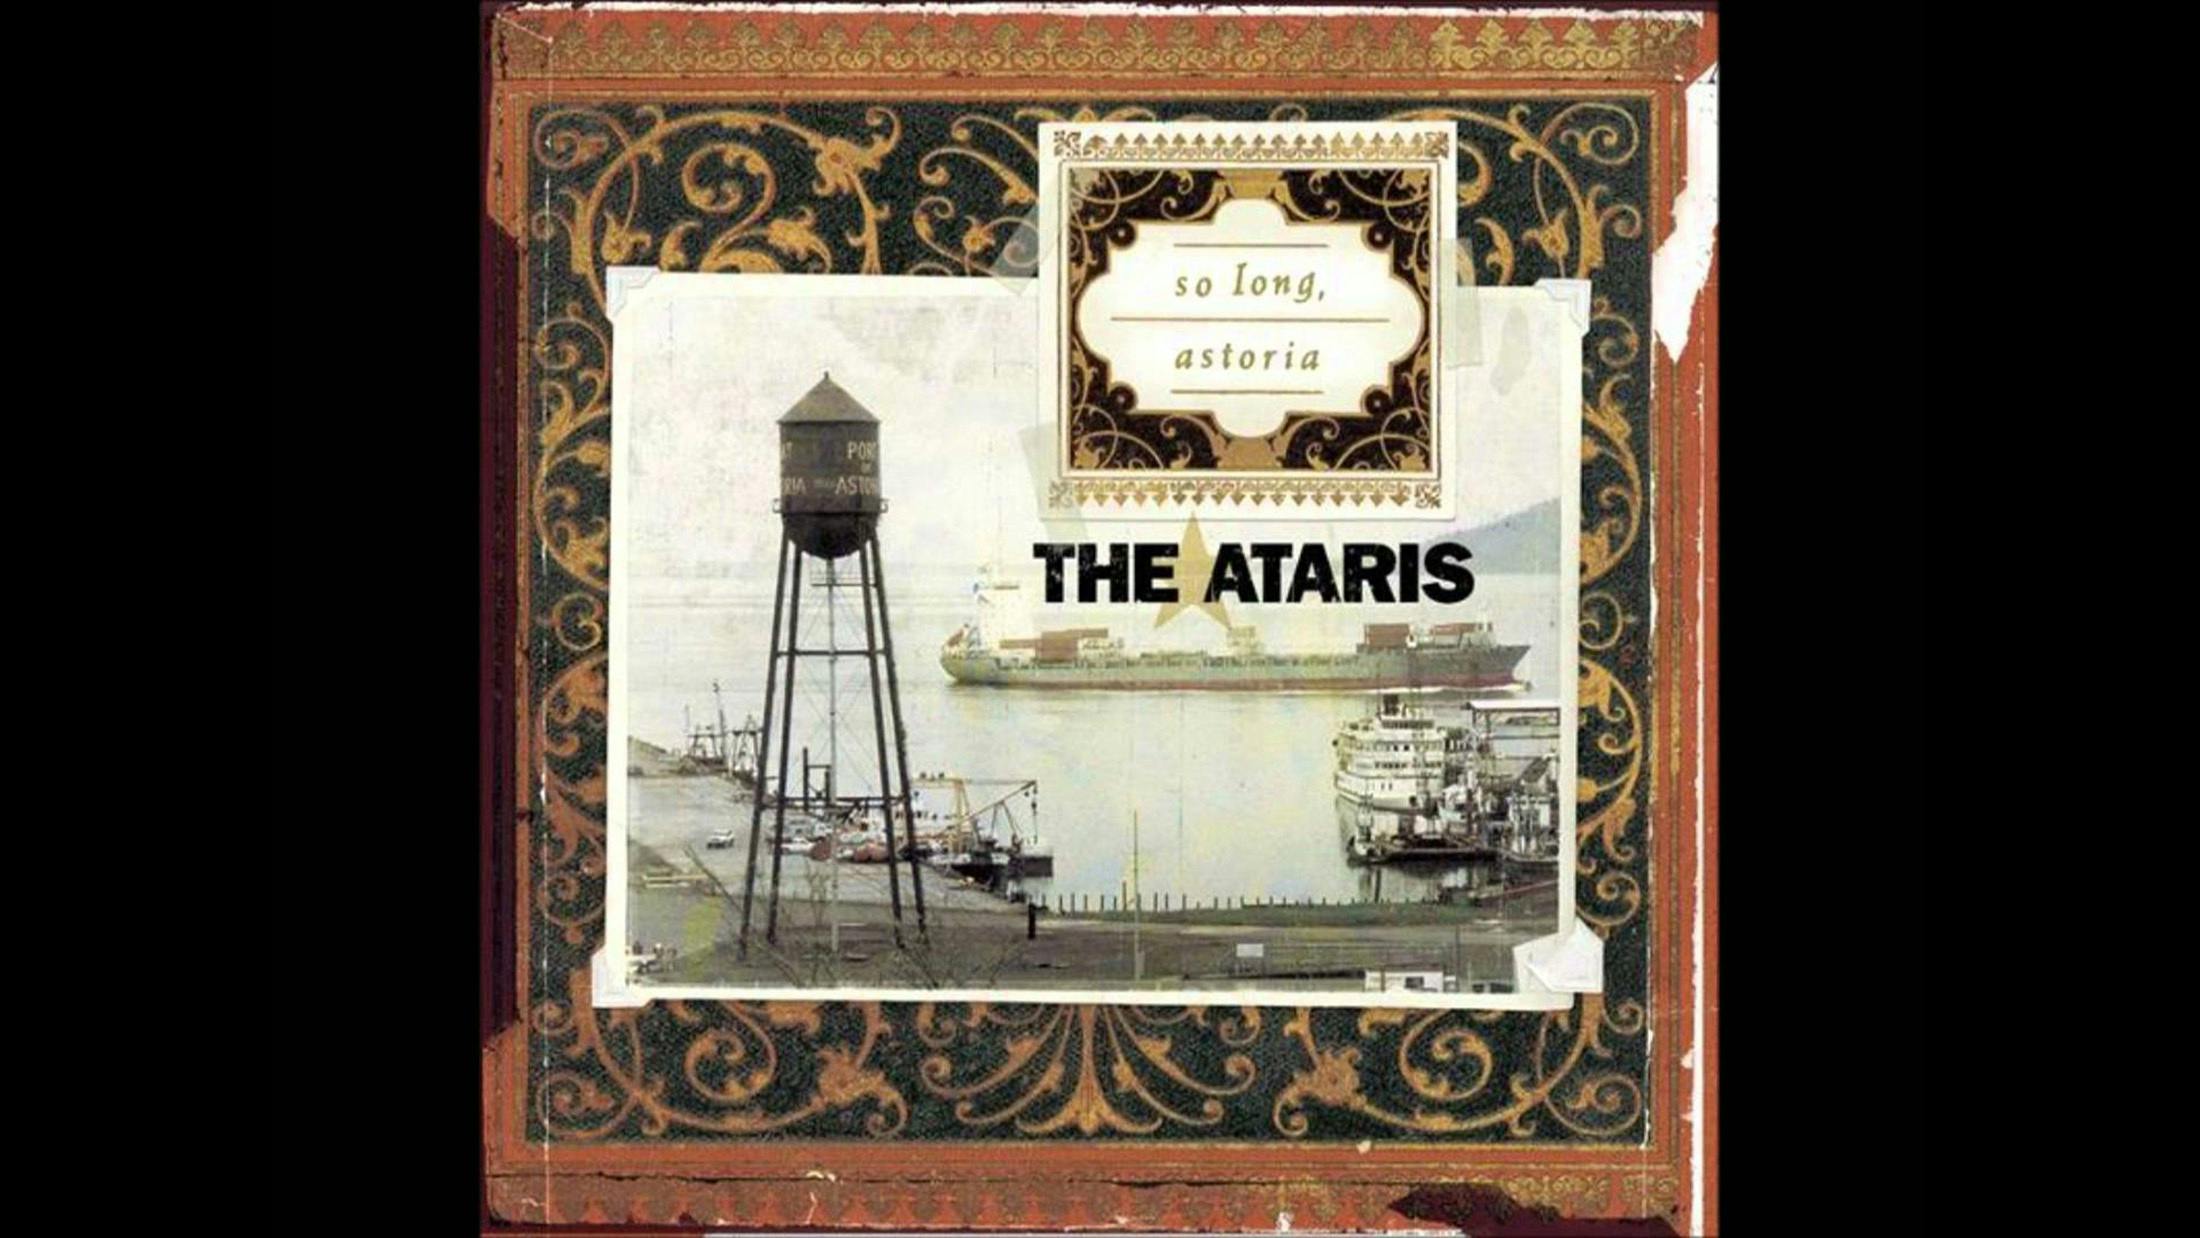 While his powers have waned in recent years, Kris Roe’s skill with three chords and the truth was once second to virtually no-one. The Ataris’ So Long, Astoria is solid-gold evidence of that fact while their cover of Don Henley’s Boys Of Summer remains as good as (dare we say, even better than) the original.